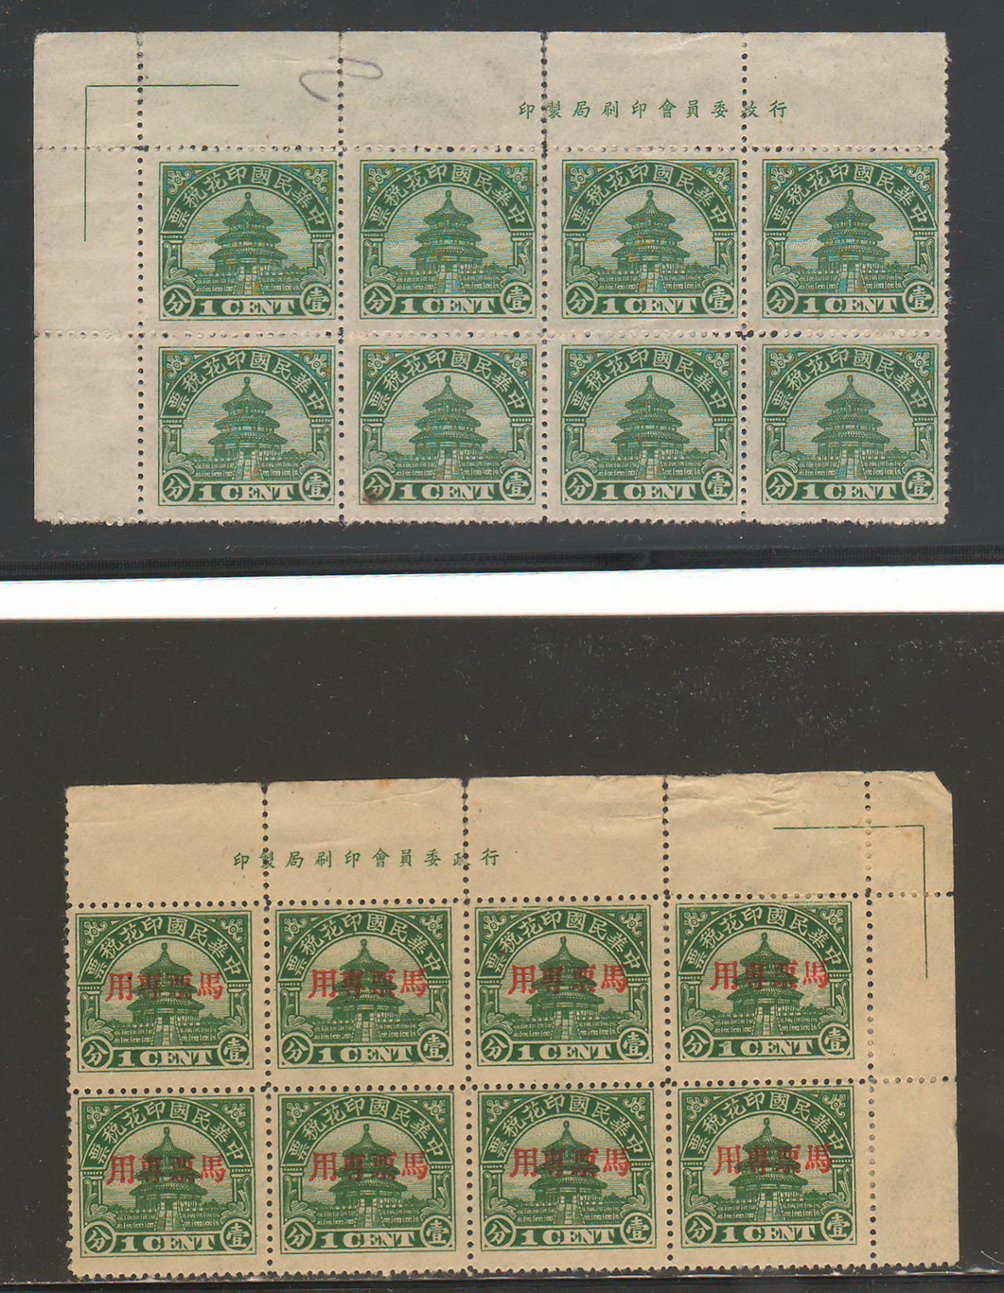 1940 Temple of Heaven 1c green in Printer's Imprint block of 8 and a second block of 8 with red horse racing tax overprint